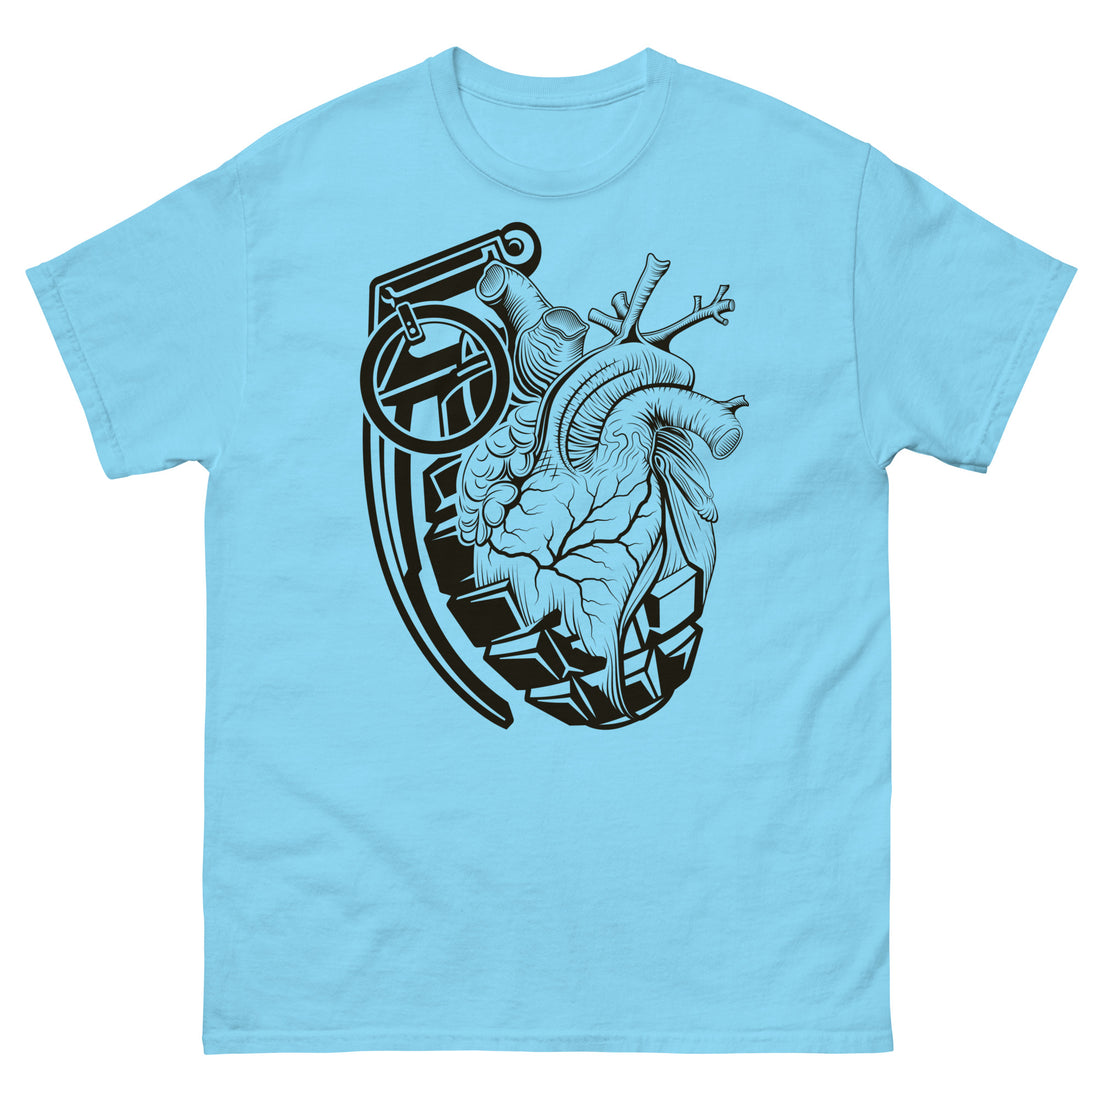 A sky blue t-shirt with a black grenade of sold color and line work morphing into an anatomical heart drawn using line work and hatching for shading at the top right of the image.